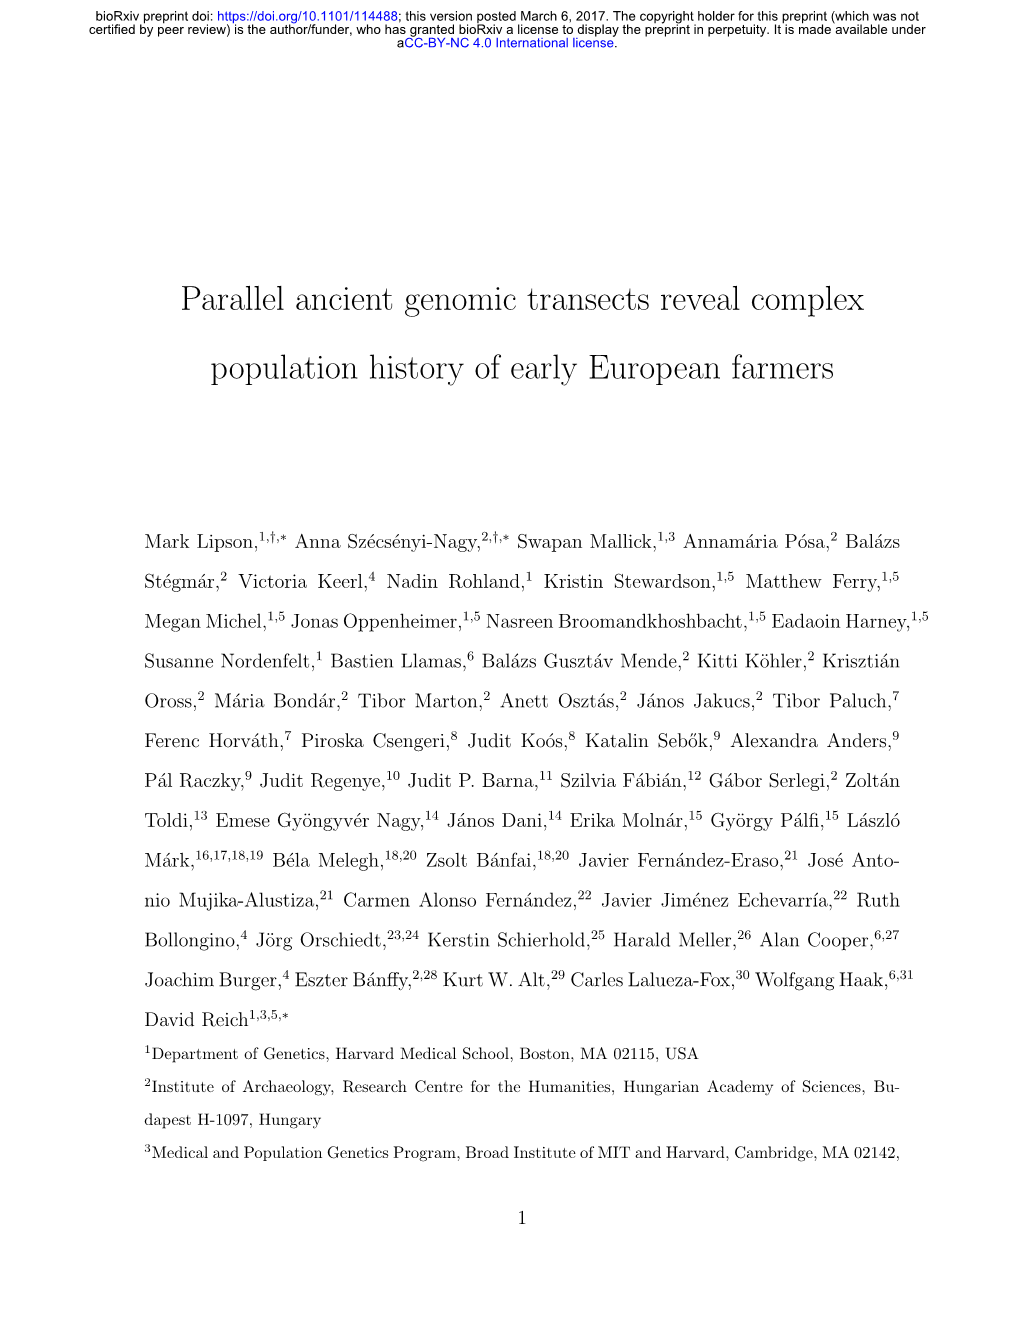 Parallel Ancient Genomic Transects Reveal Complex Population History of Early European Farmers